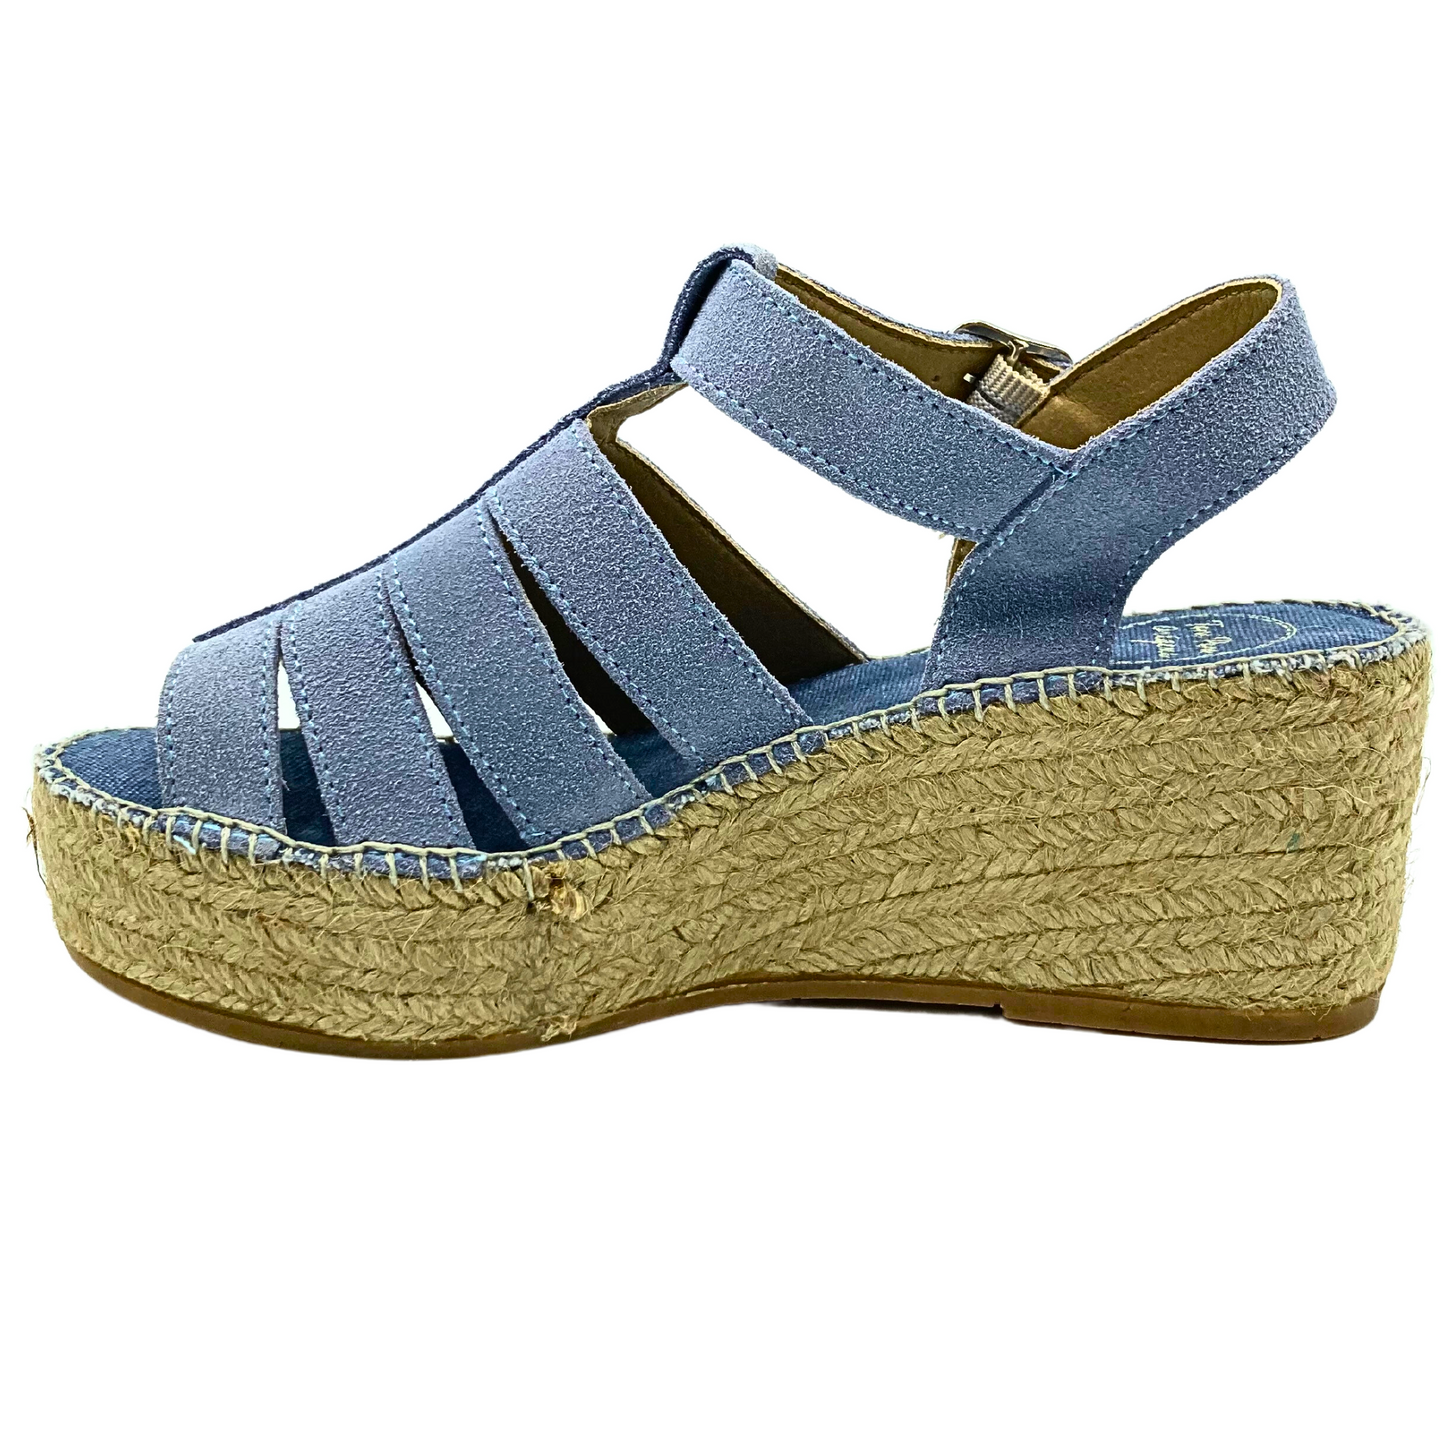 Inside view of chunky wedge espadrille sandal.  Jute rope outsole.